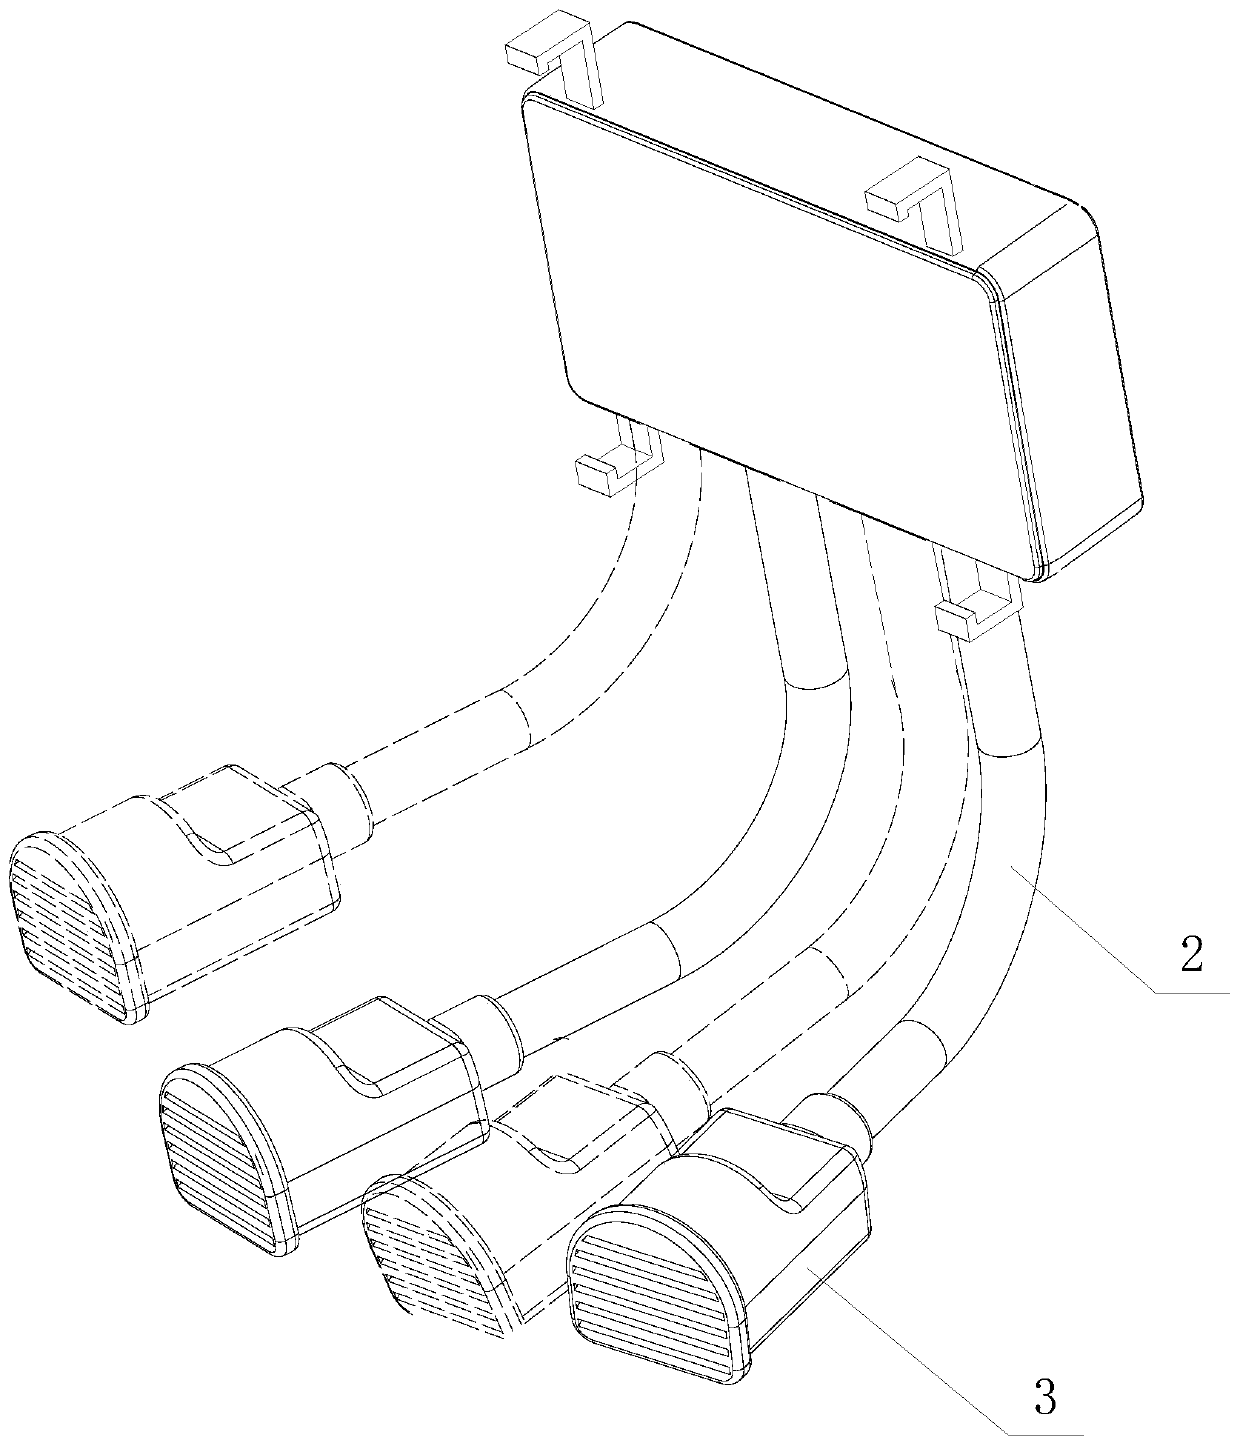 Novel fork-arm type vehicle-mounted air purification device